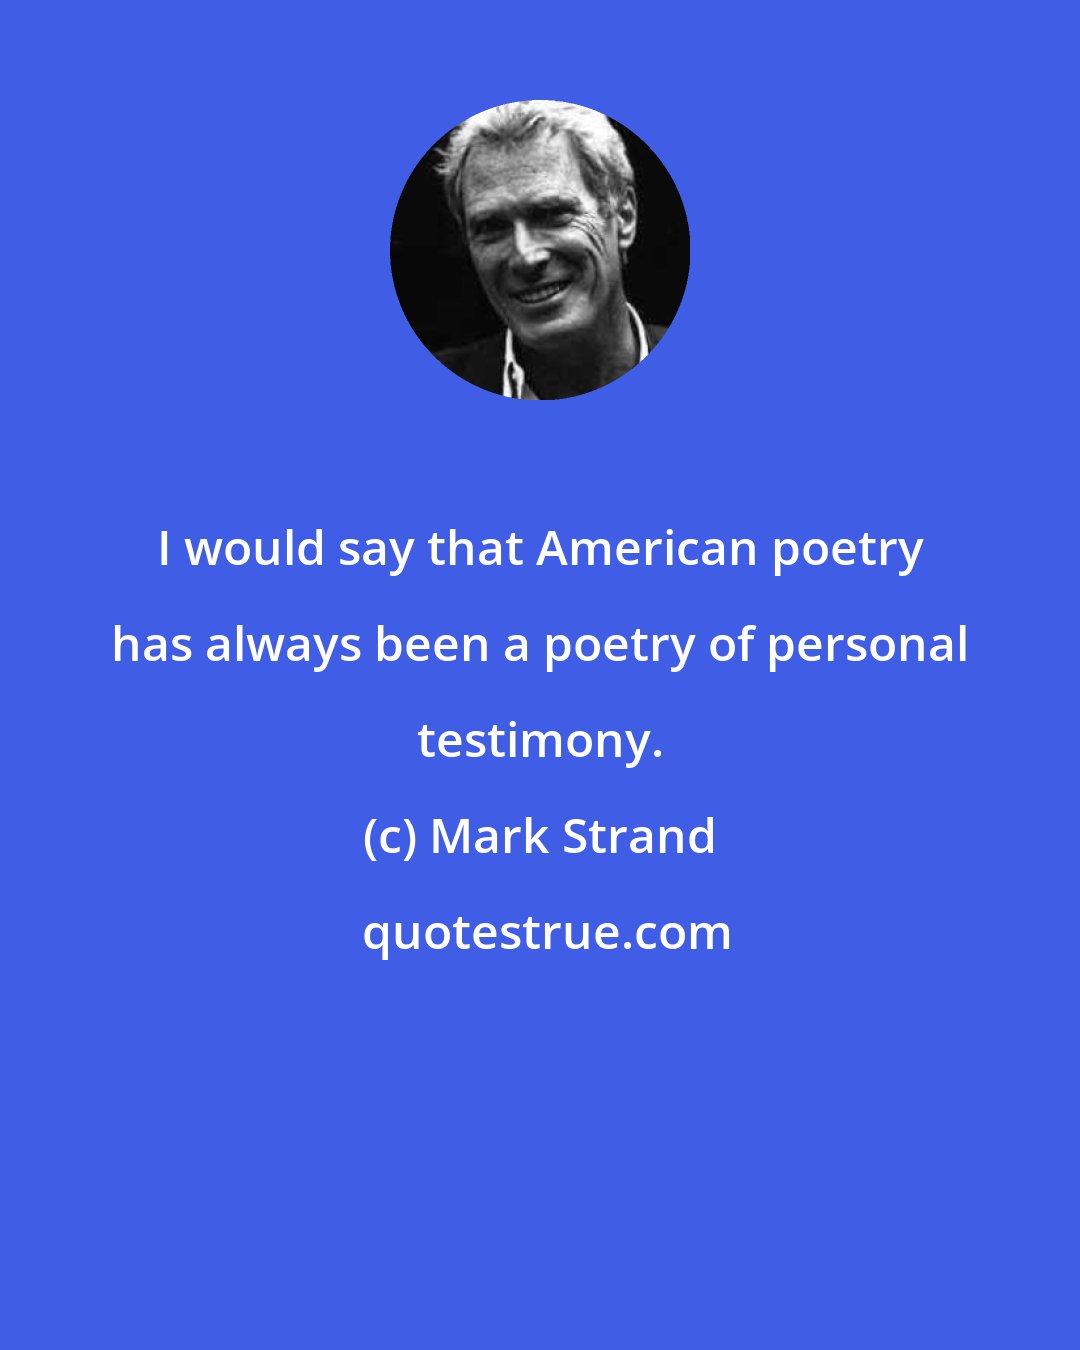 Mark Strand: I would say that American poetry has always been a poetry of personal testimony.